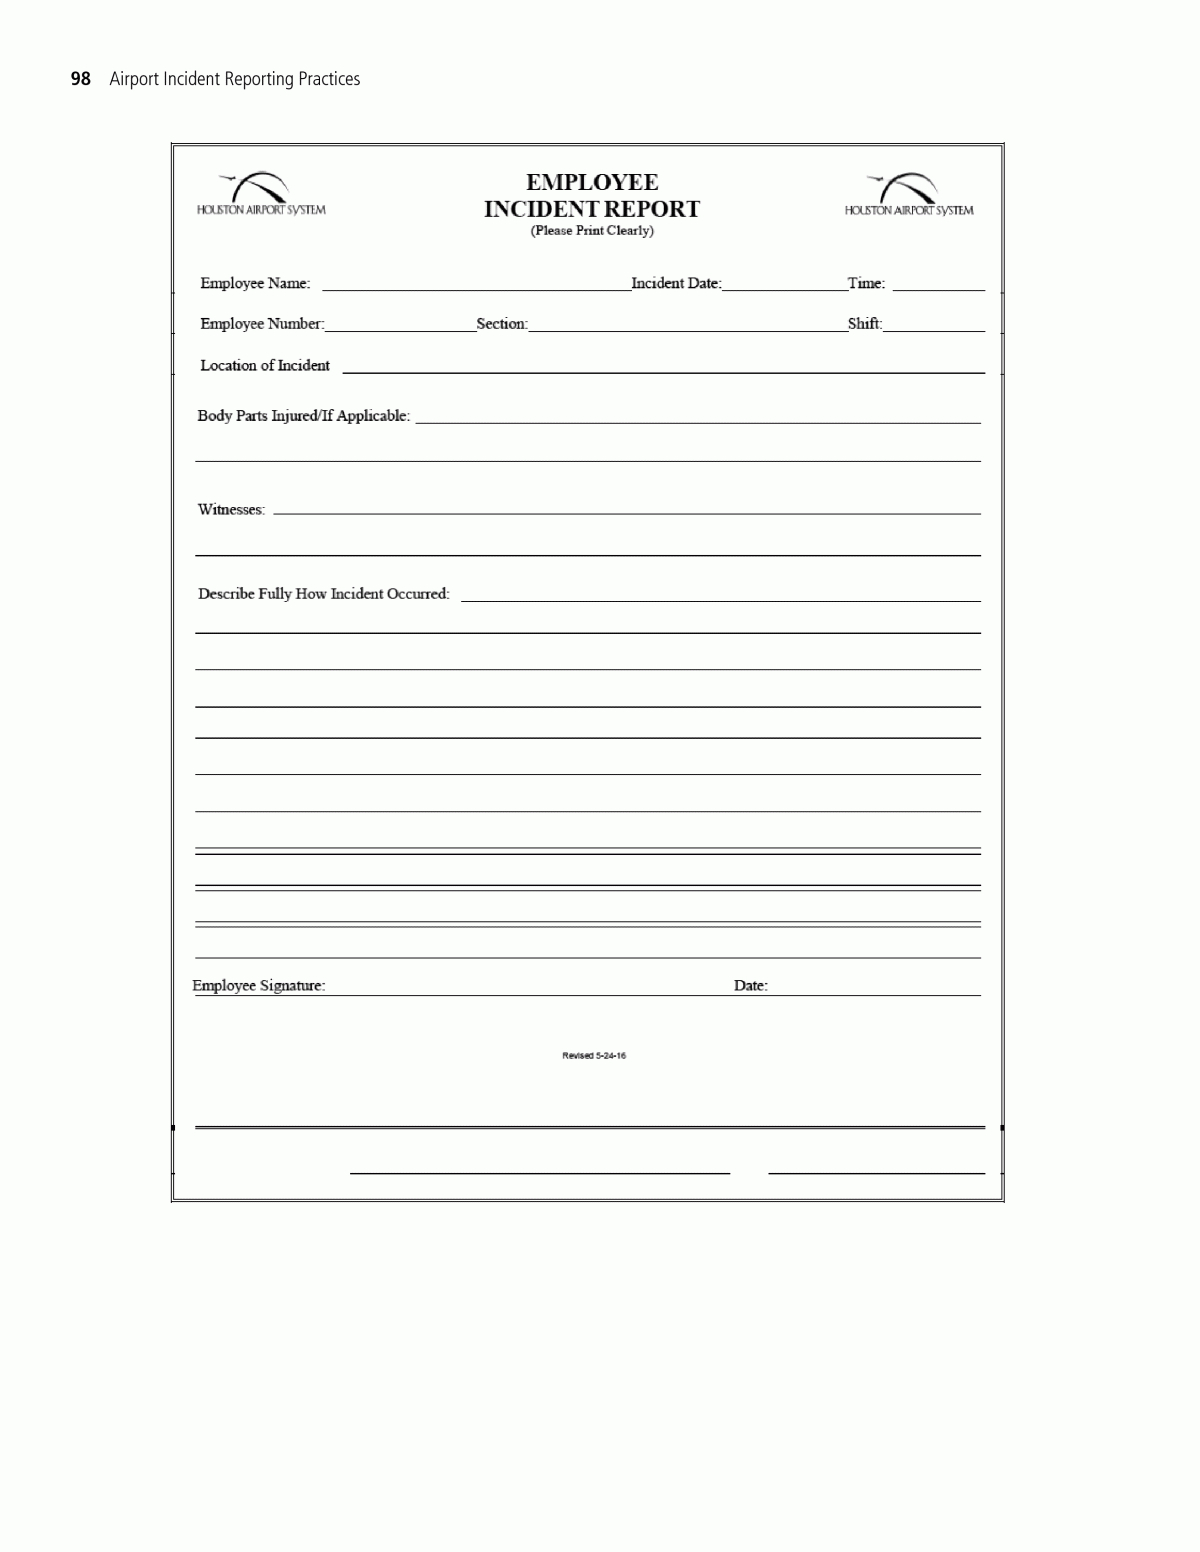 Appendix H - Sample Employee Incident Report Form | Airport Intended For Injury Report Form Template